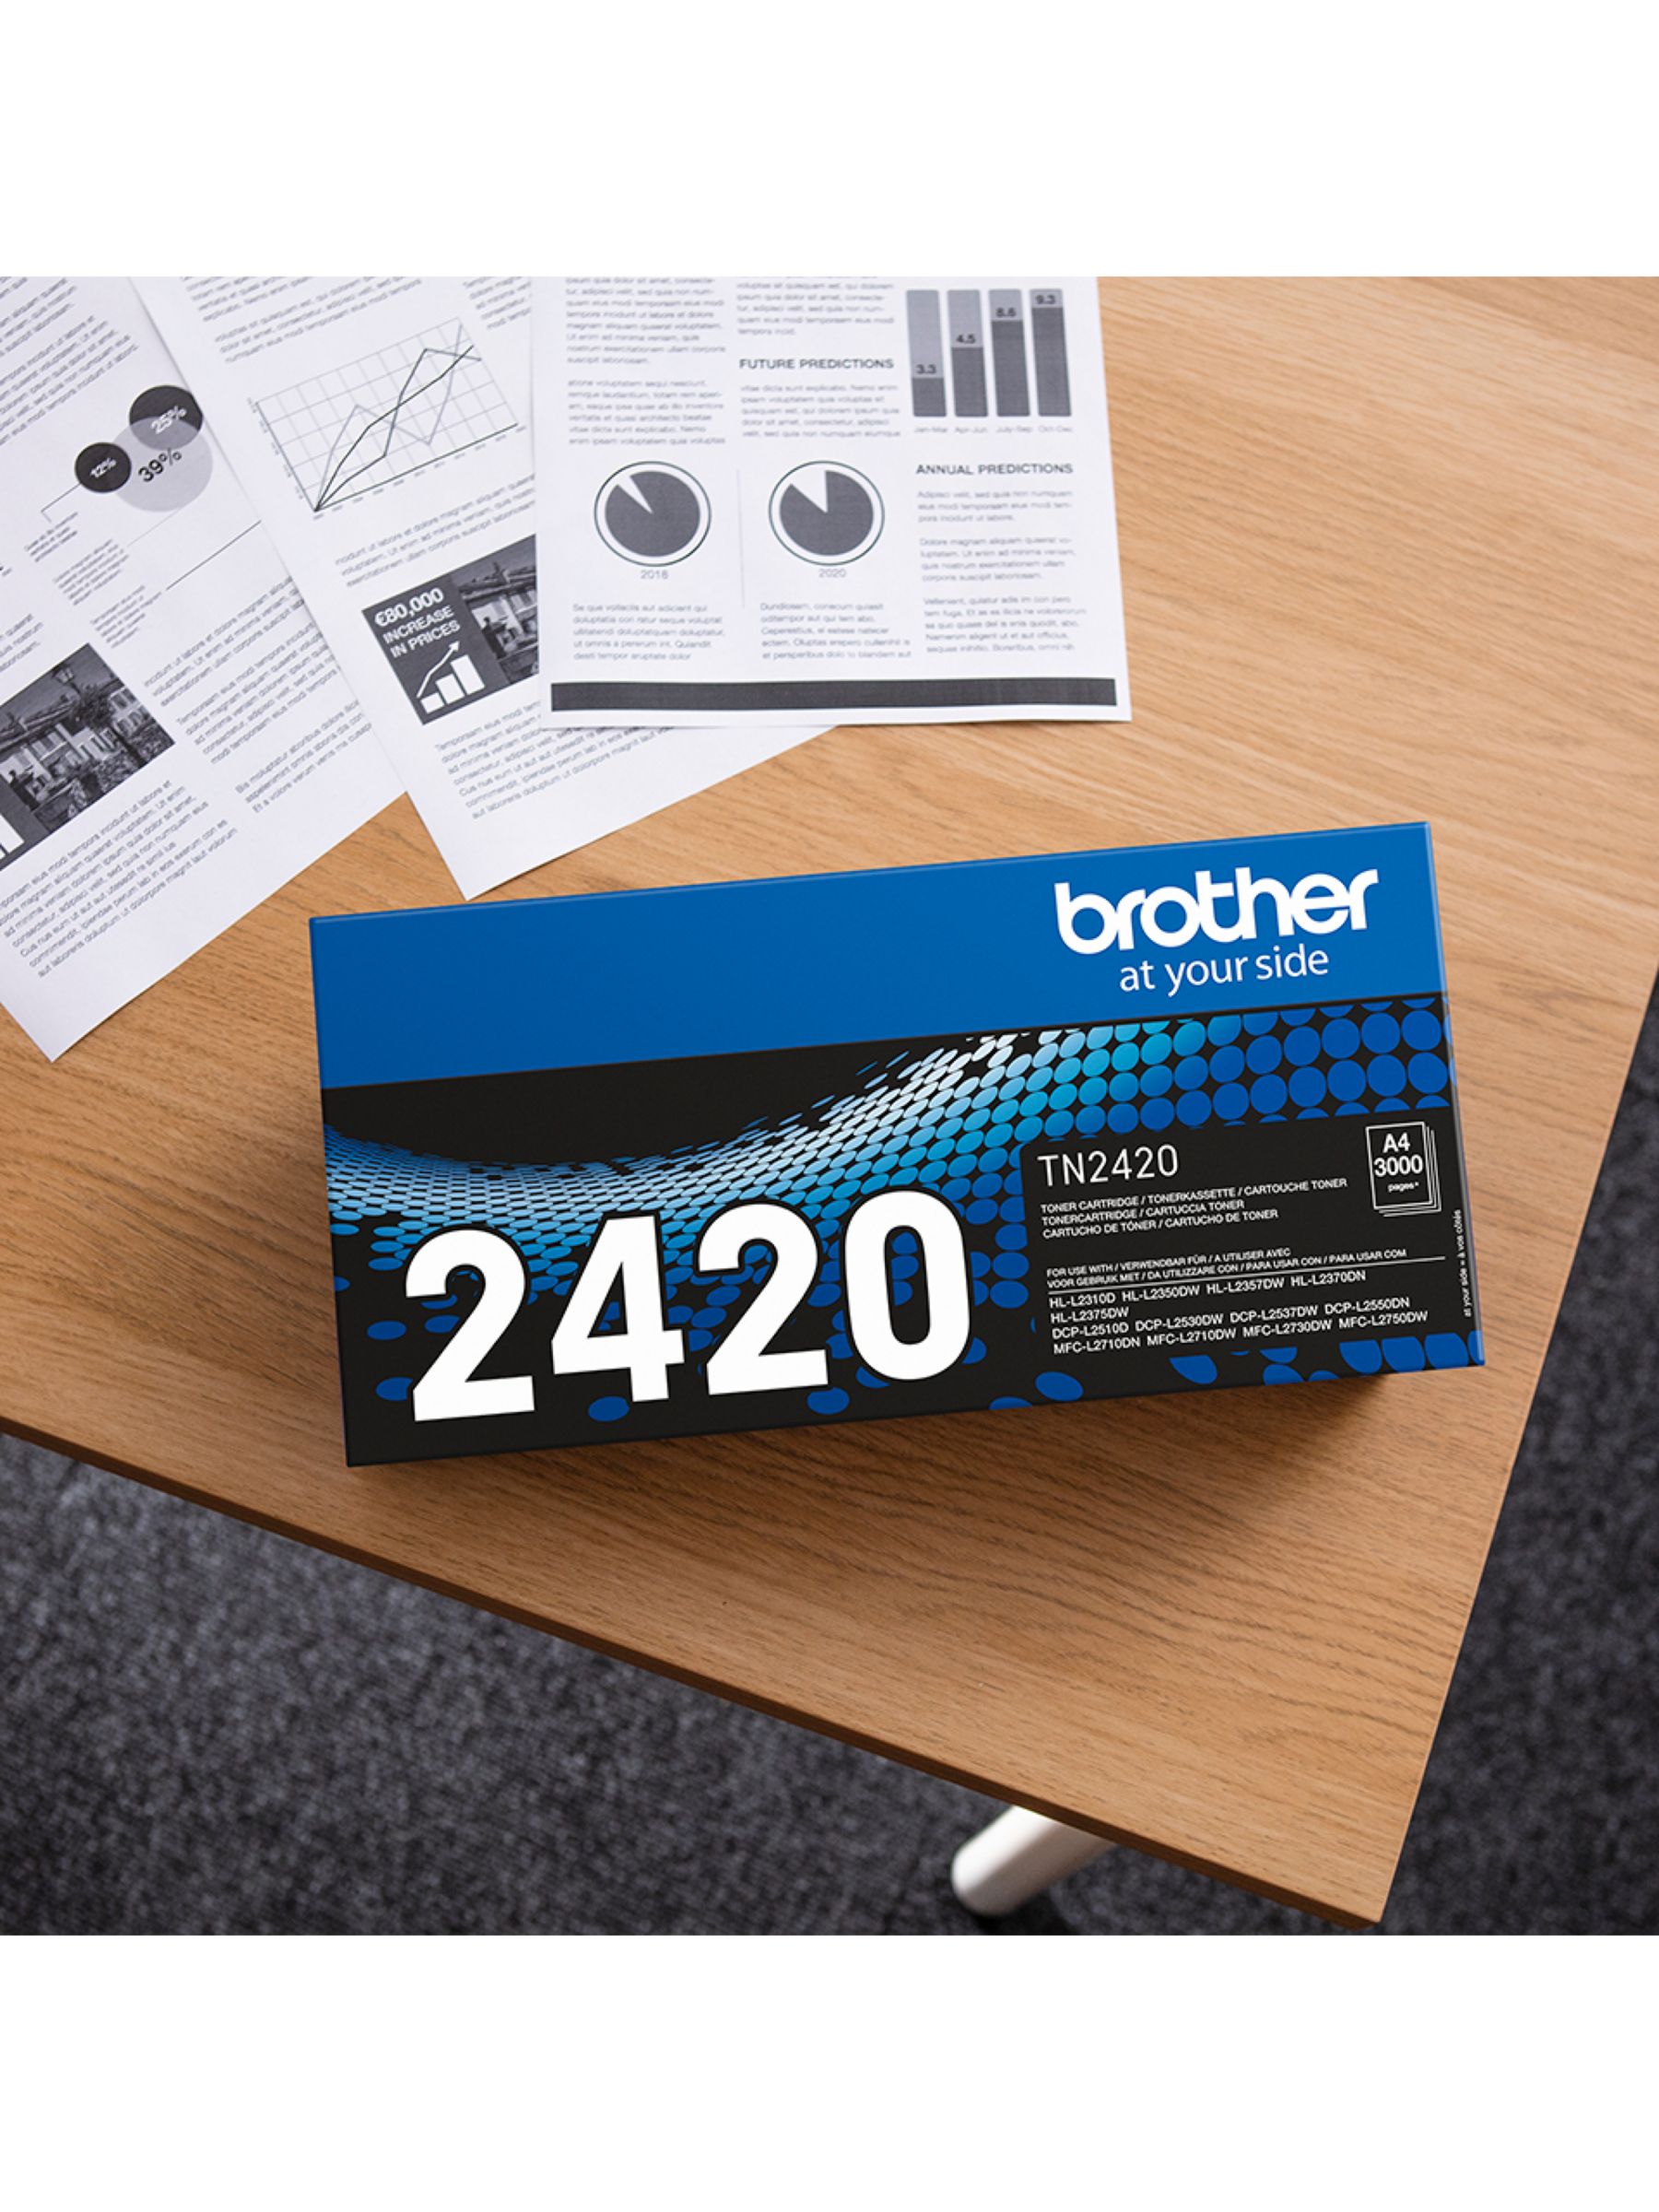 Compatible Toner Cartridge TN-2420 for Brother (TN-2420) (Black)